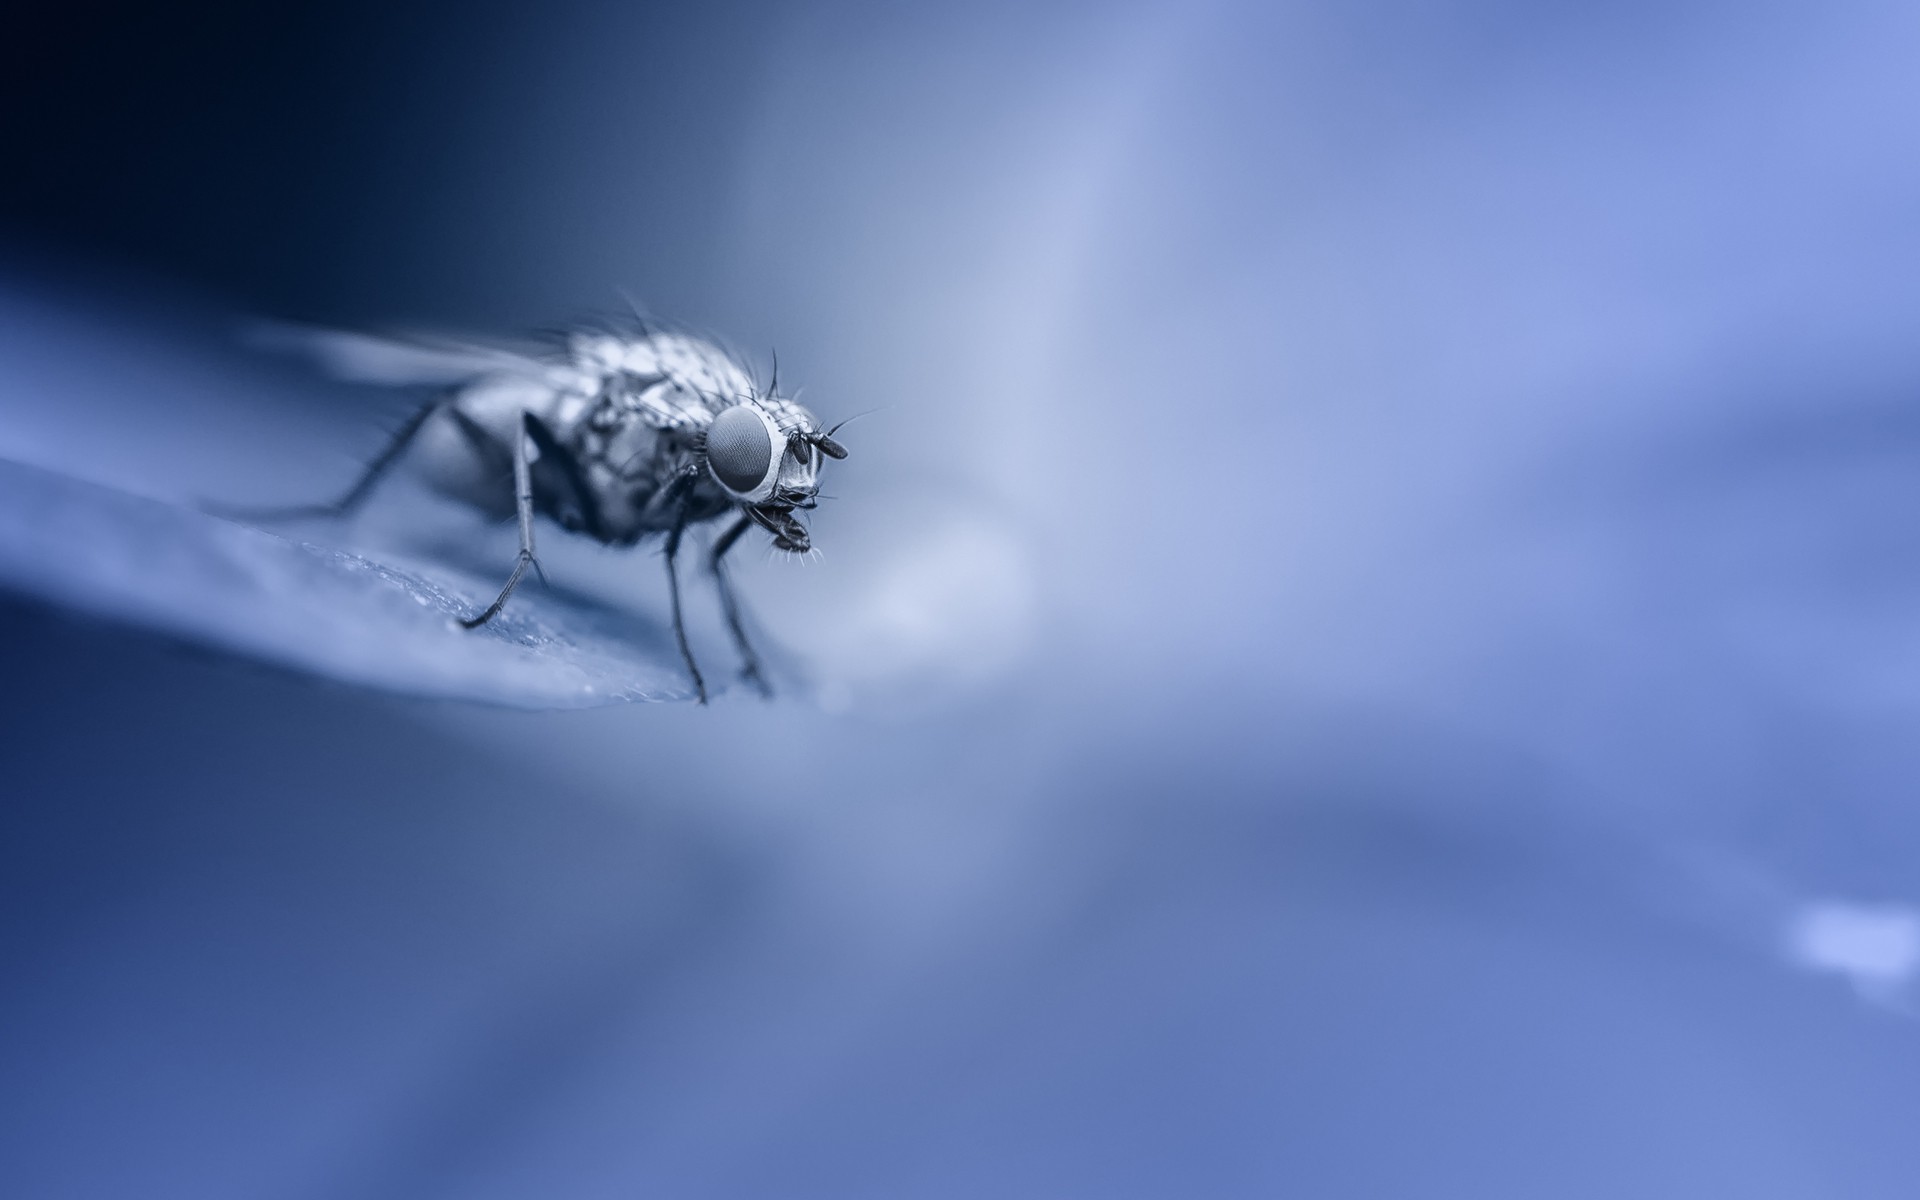 animals, Insect, Fly, Diptera, Macro, Blue Wallpaper